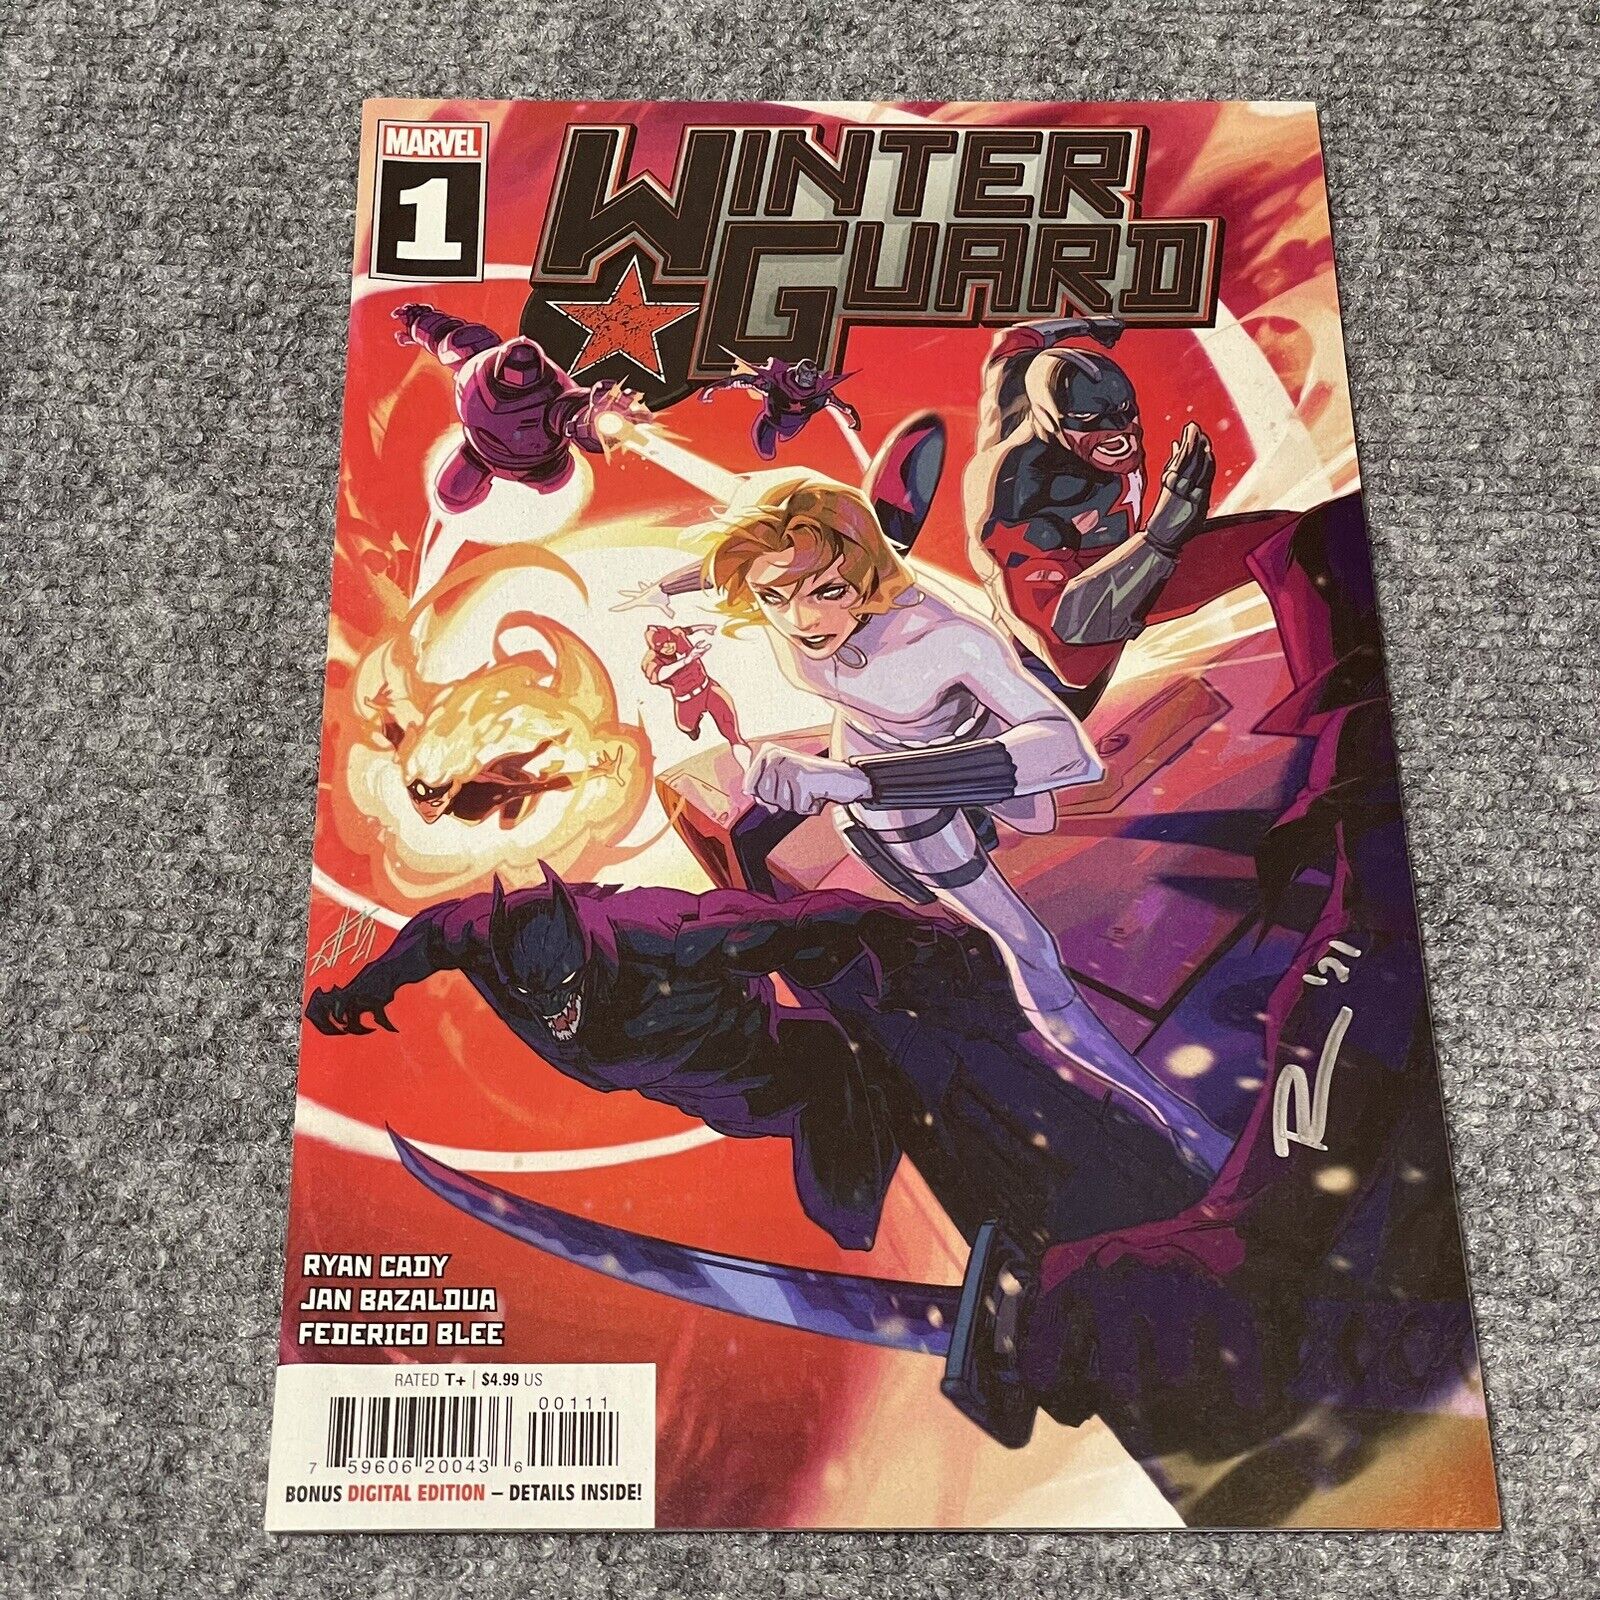 Winter Guard 1 Marvel Comics Signed Ryan Cady   Autograph Red Guardian Yelena